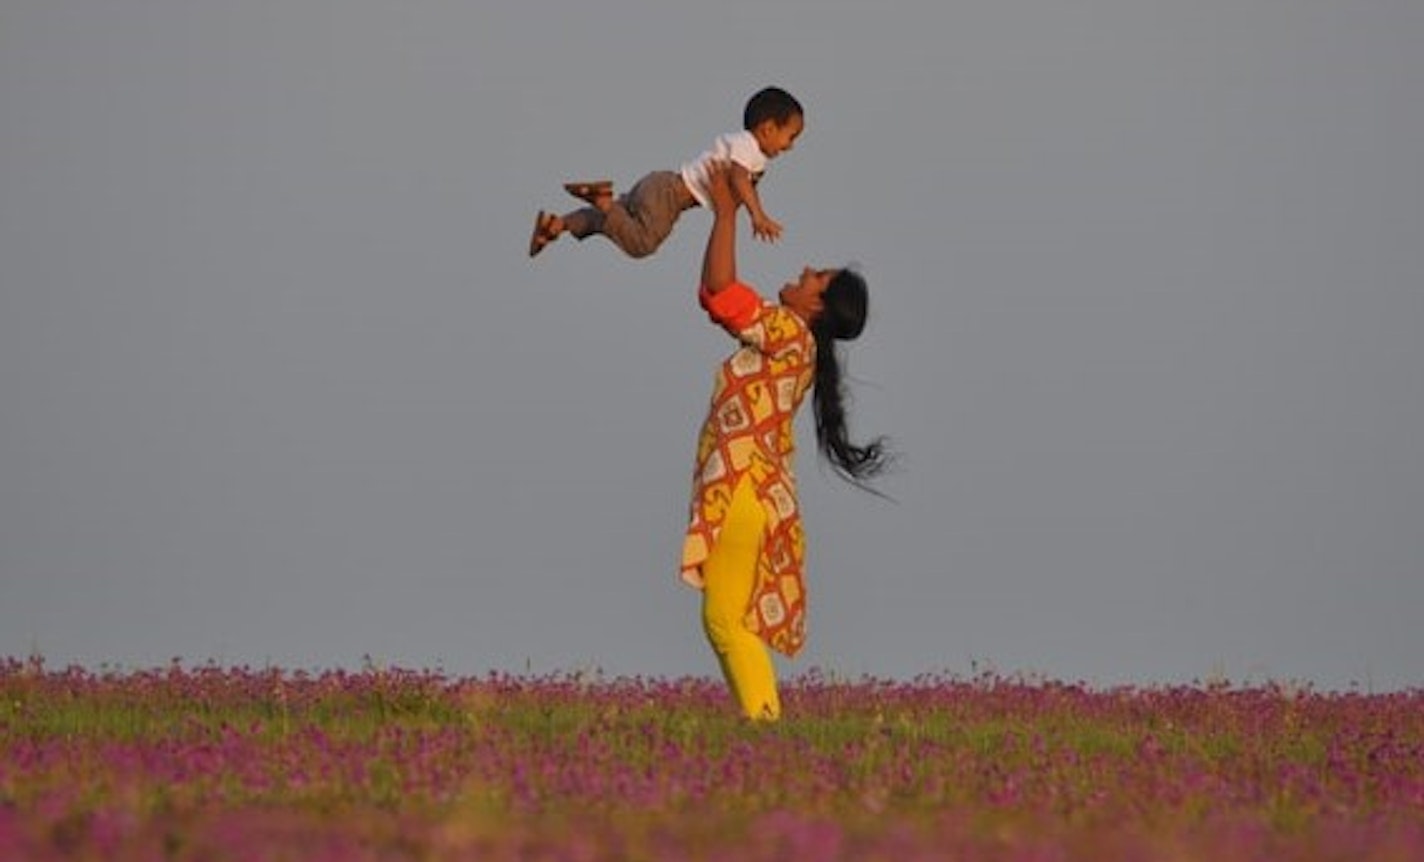 Dancing the Mother's Strength